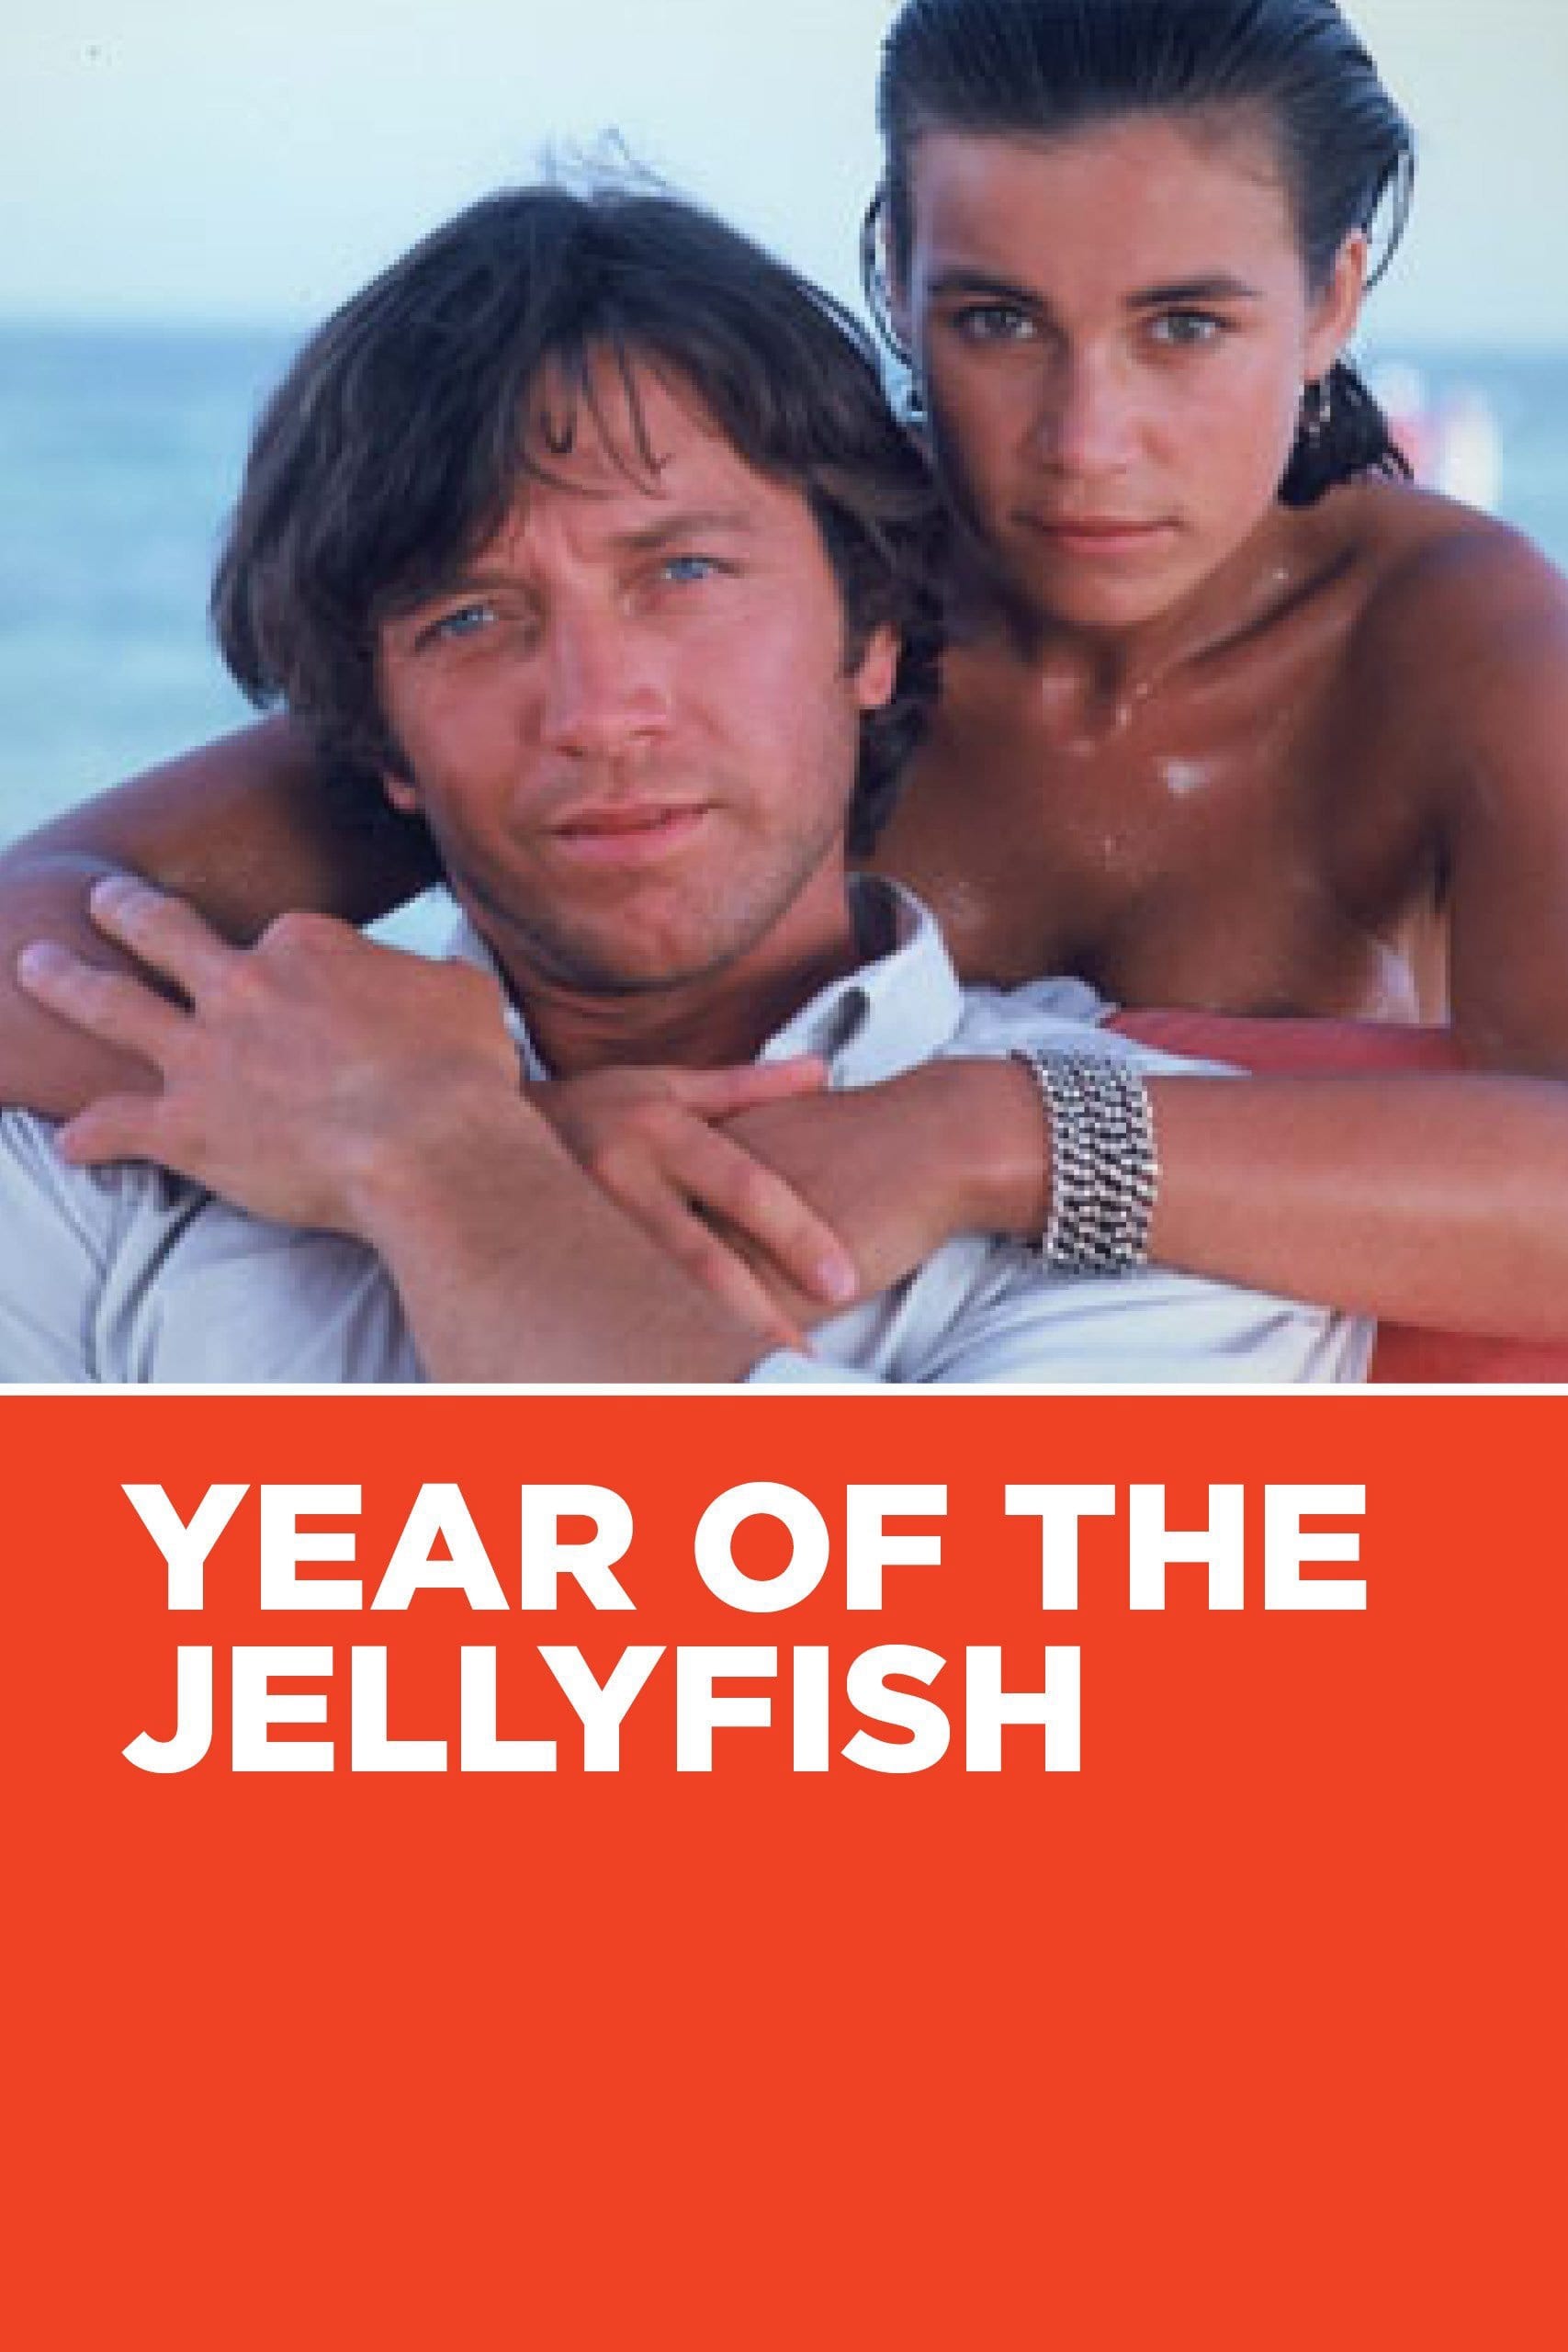 Year of the Jellyfish